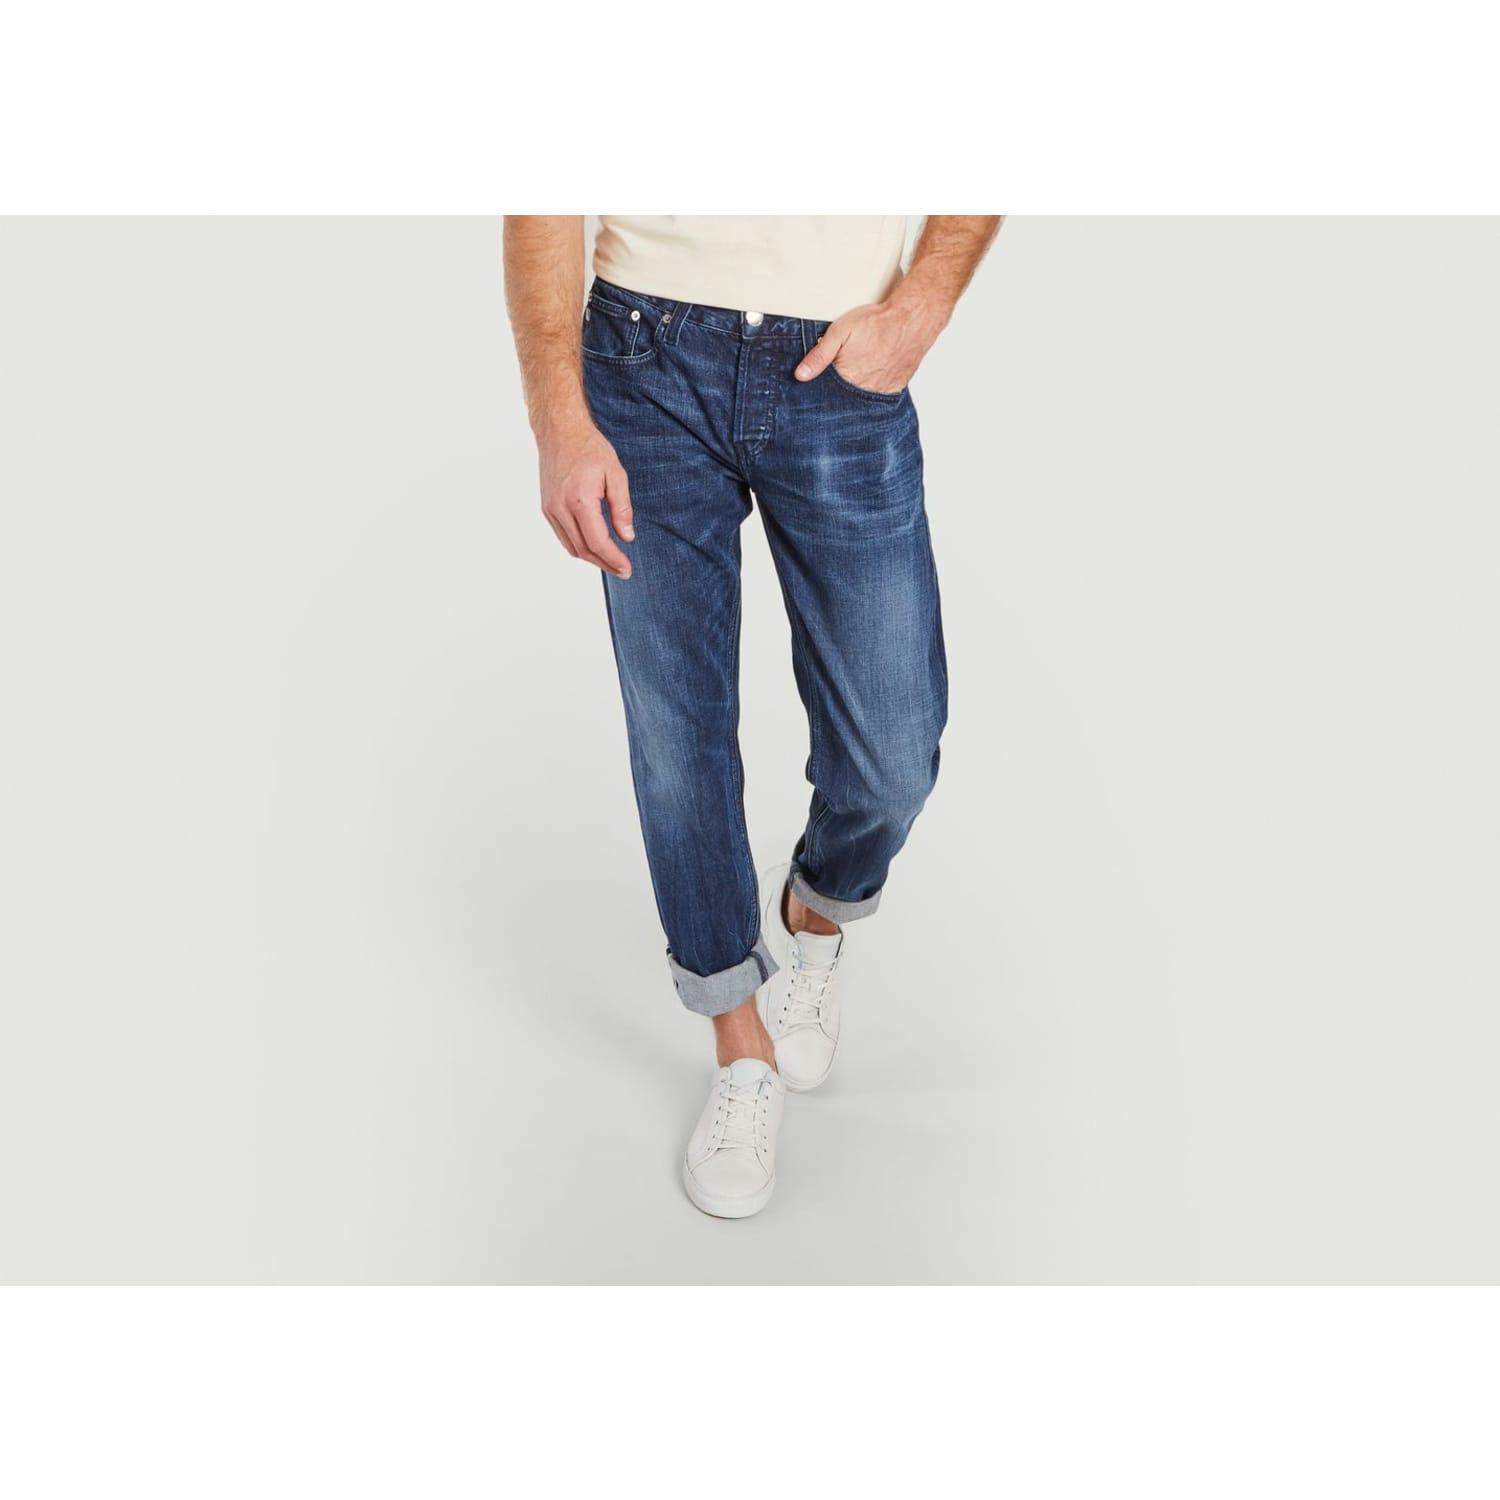 MUD Jeans Dunn Stretch Regular Jeans in Blue for Men | Lyst